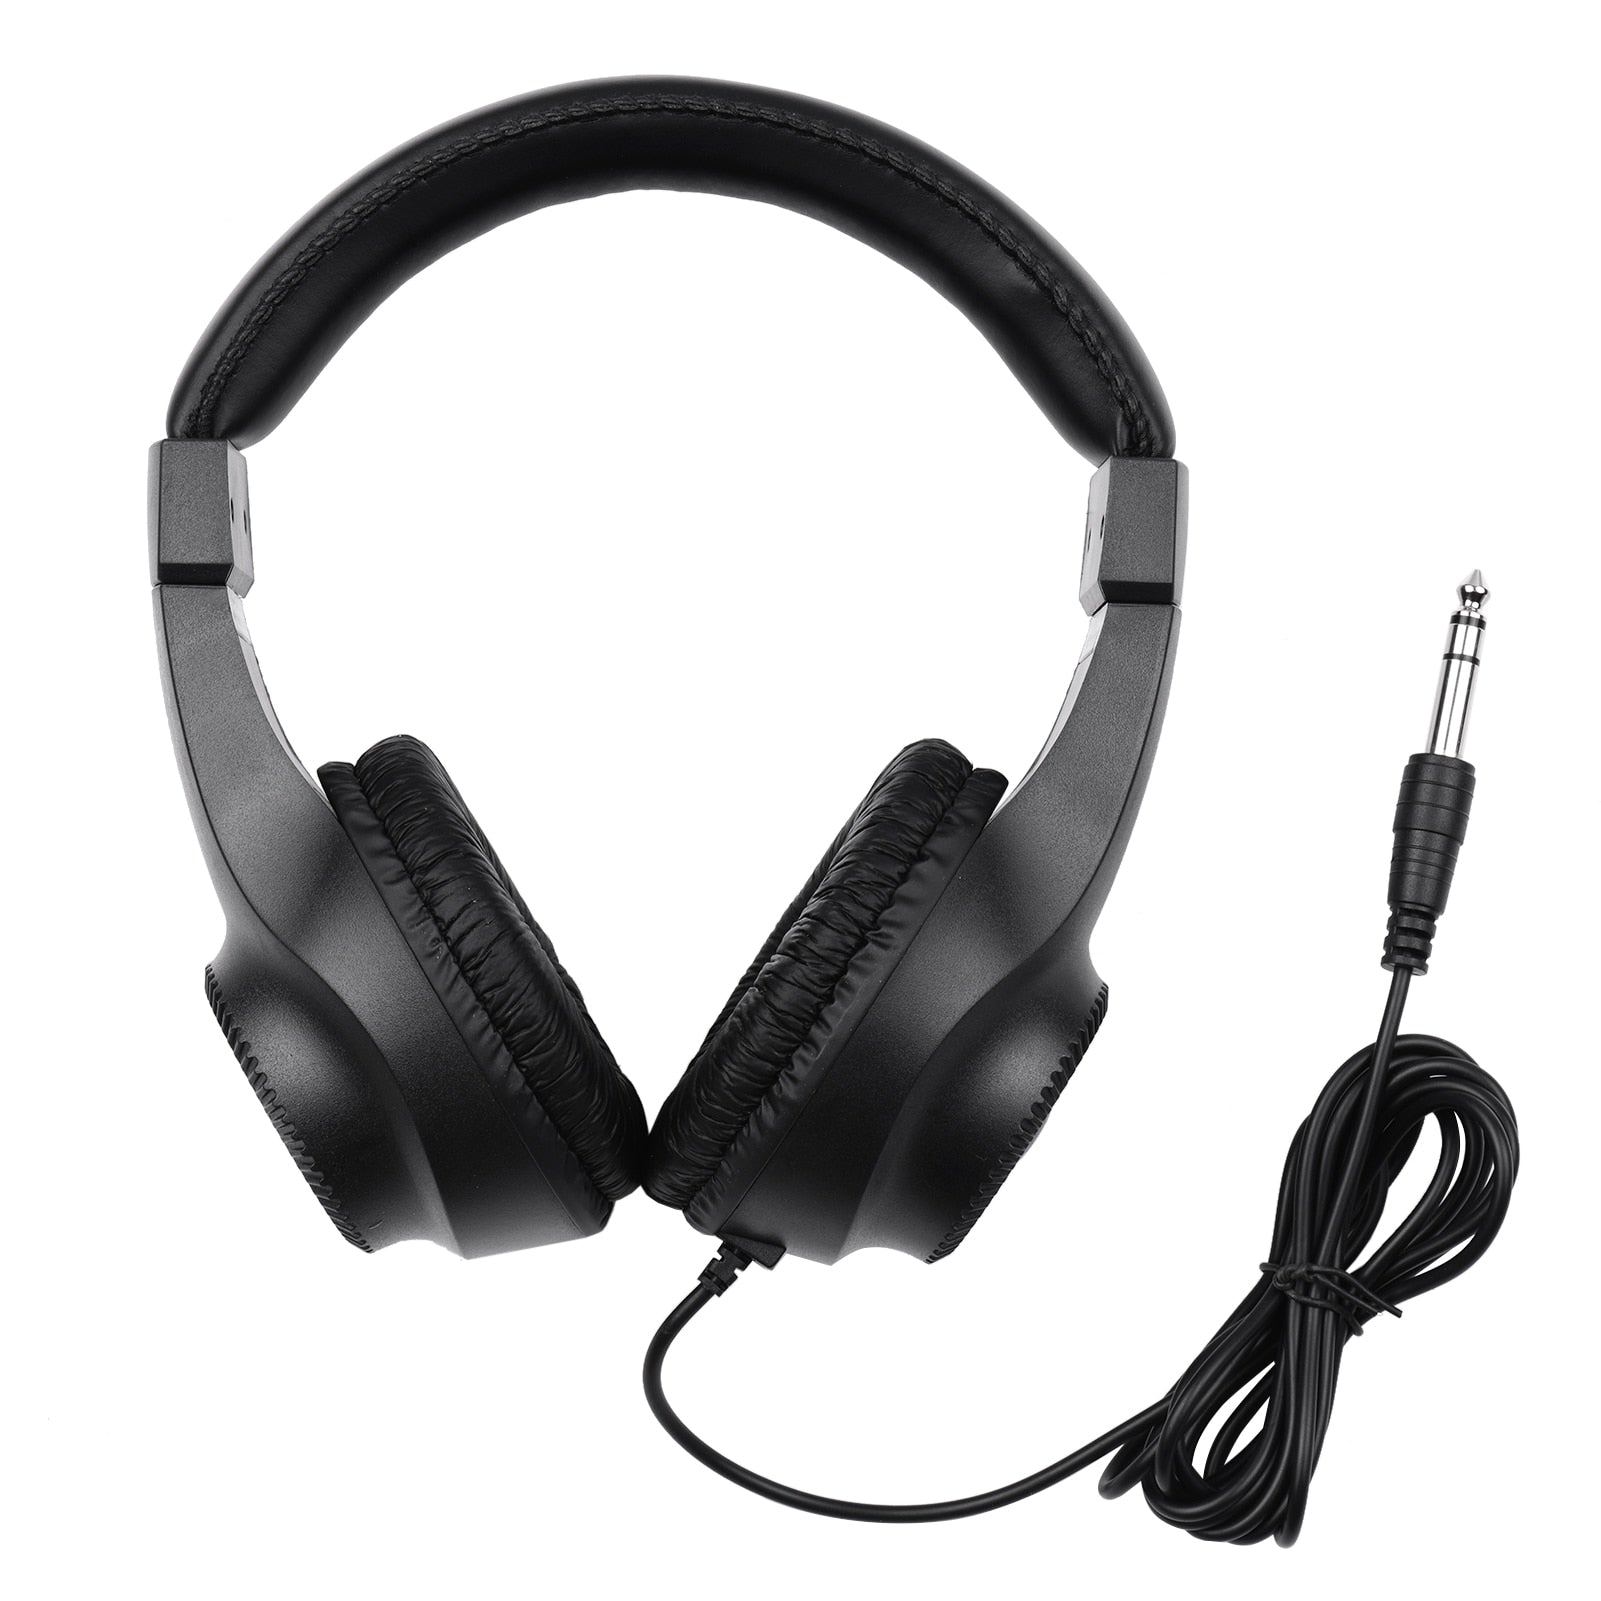 High-Fidelity  Professional  Clear Sound  Studio-Quality  Comfortable Fit  Reliable  Precision Audio  Durable  Wired Connectivity  Immersive  Balanced Acoustics  Over-ear Design  Exceptional Clarity  Noise Isolation  Robust Construction